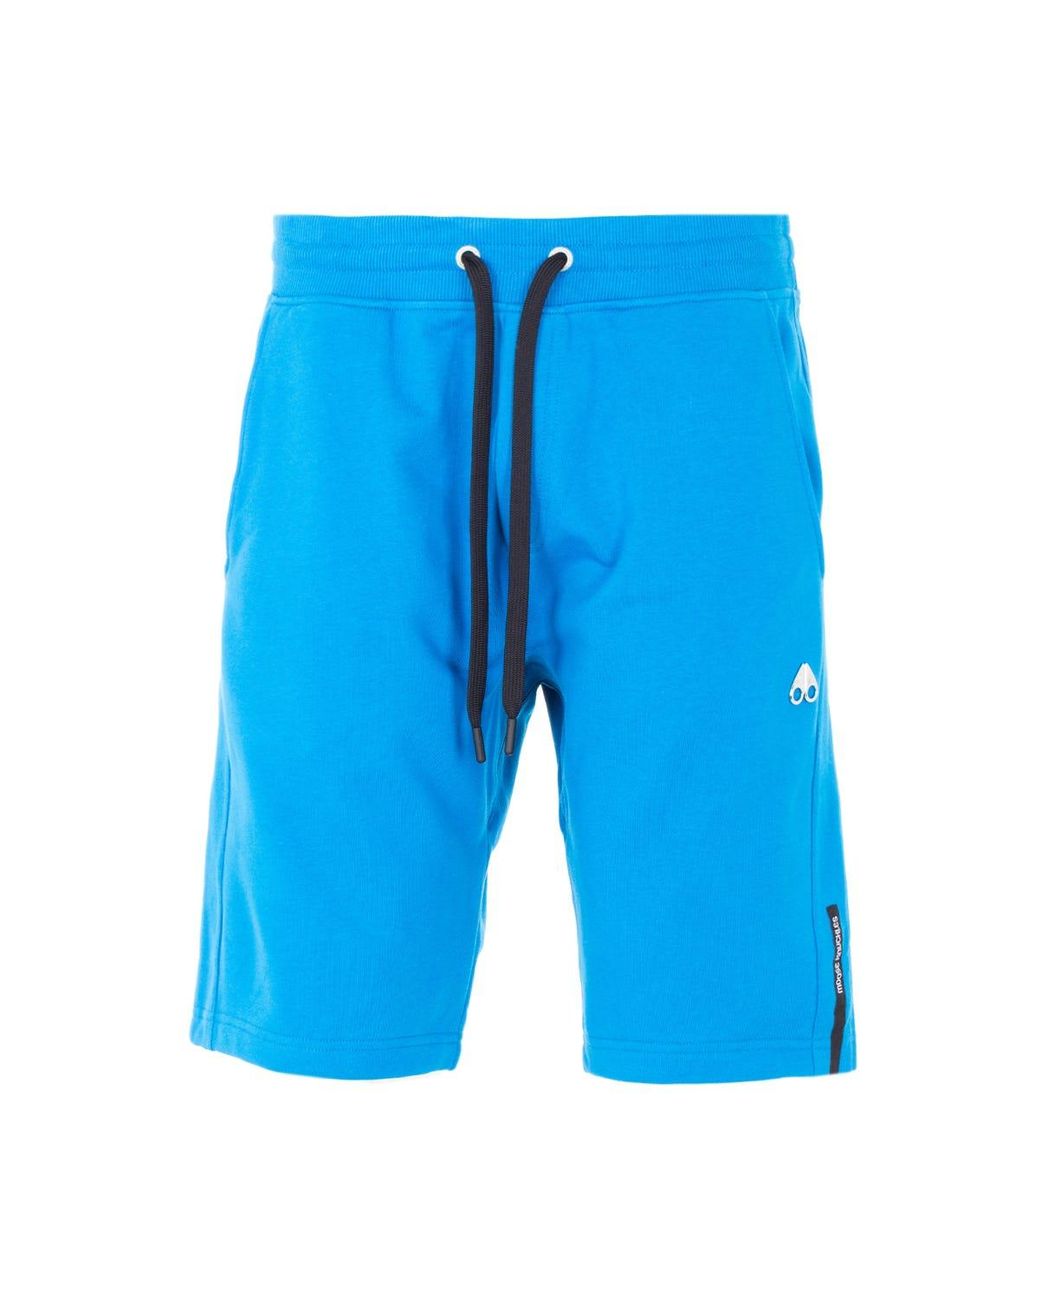 Moose Knuckles Lightyears Cotton Shorts - Blue for Men - Lyst